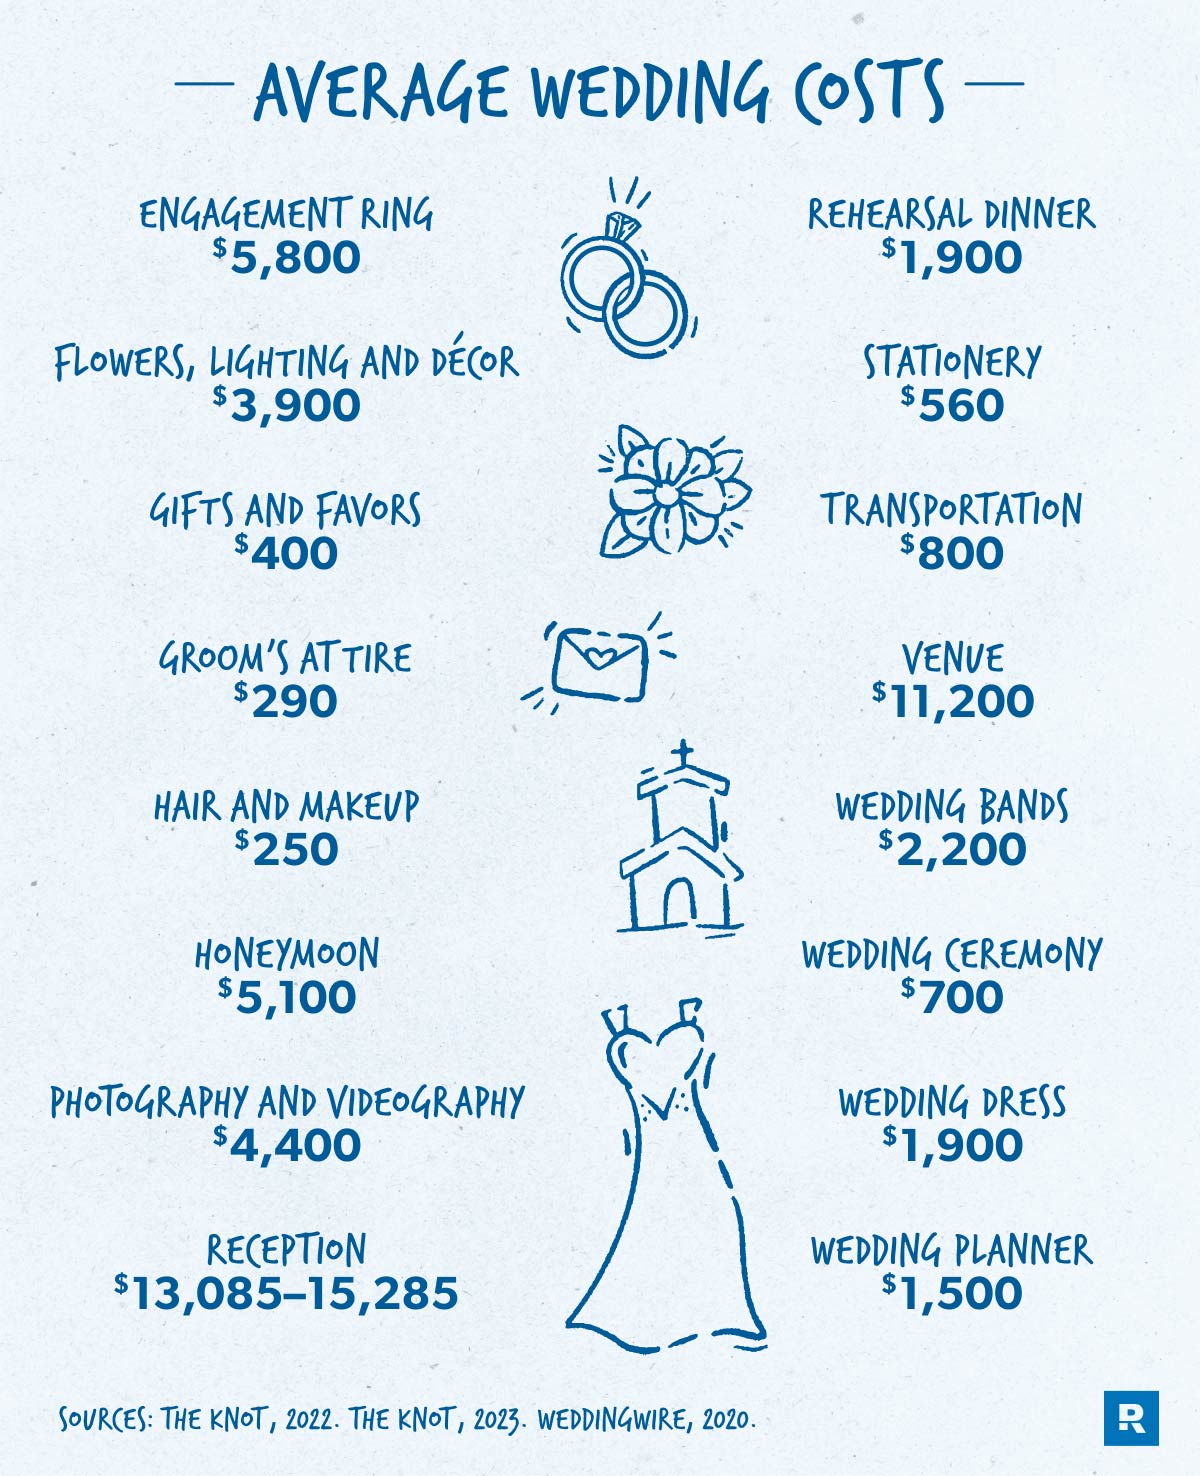 Cost of a wedding